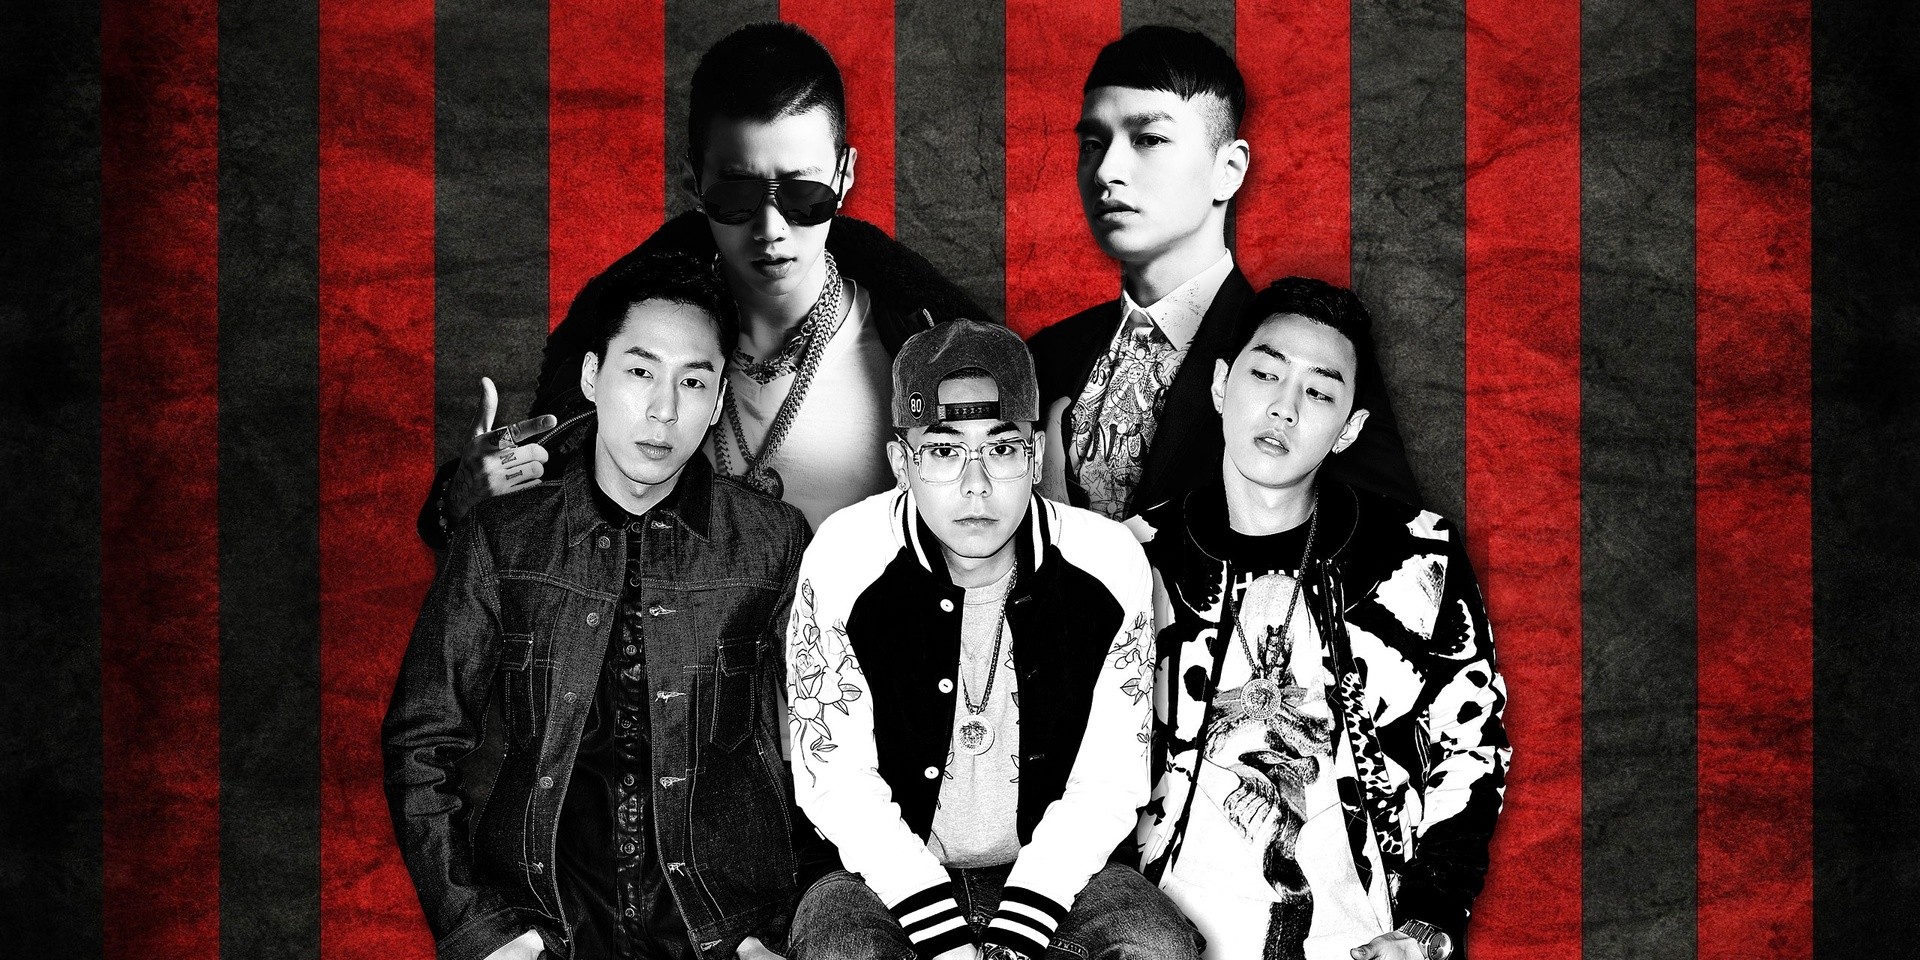 South Korea's meteoric hip-hop/R&B collective AOMG to perform in Singapore